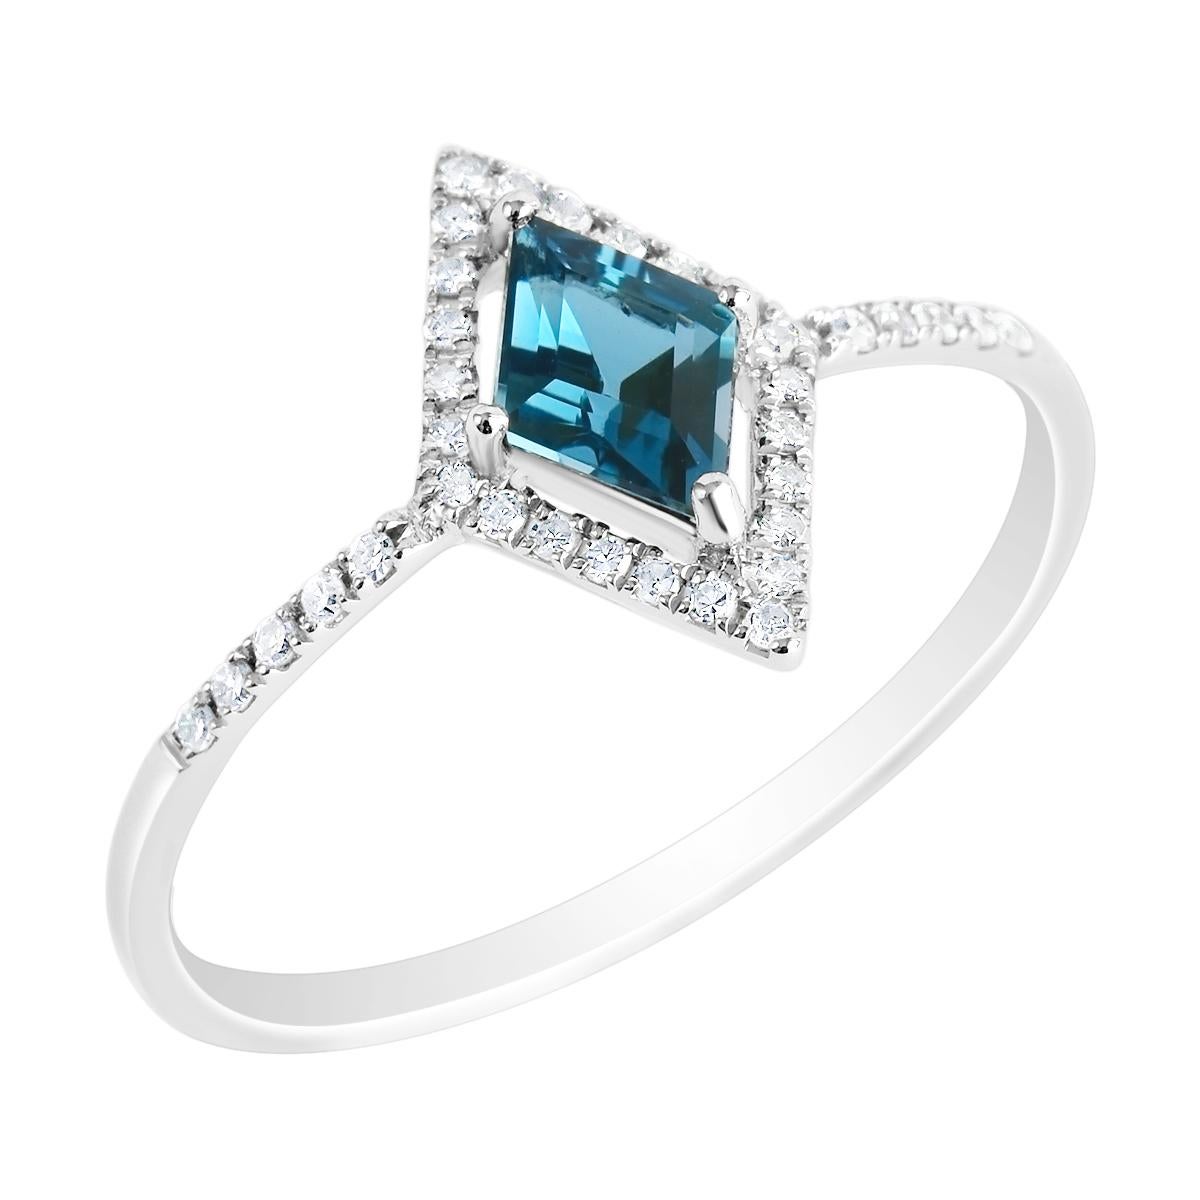 An EK Designs original this bold and distinctive ring features an alluring London blue topaz gemstone adorned with 34 sparkling diamonds. The 0.50 carat natural kite cut blue topaz is a velvety rich London blue in colour with a lovely hue and